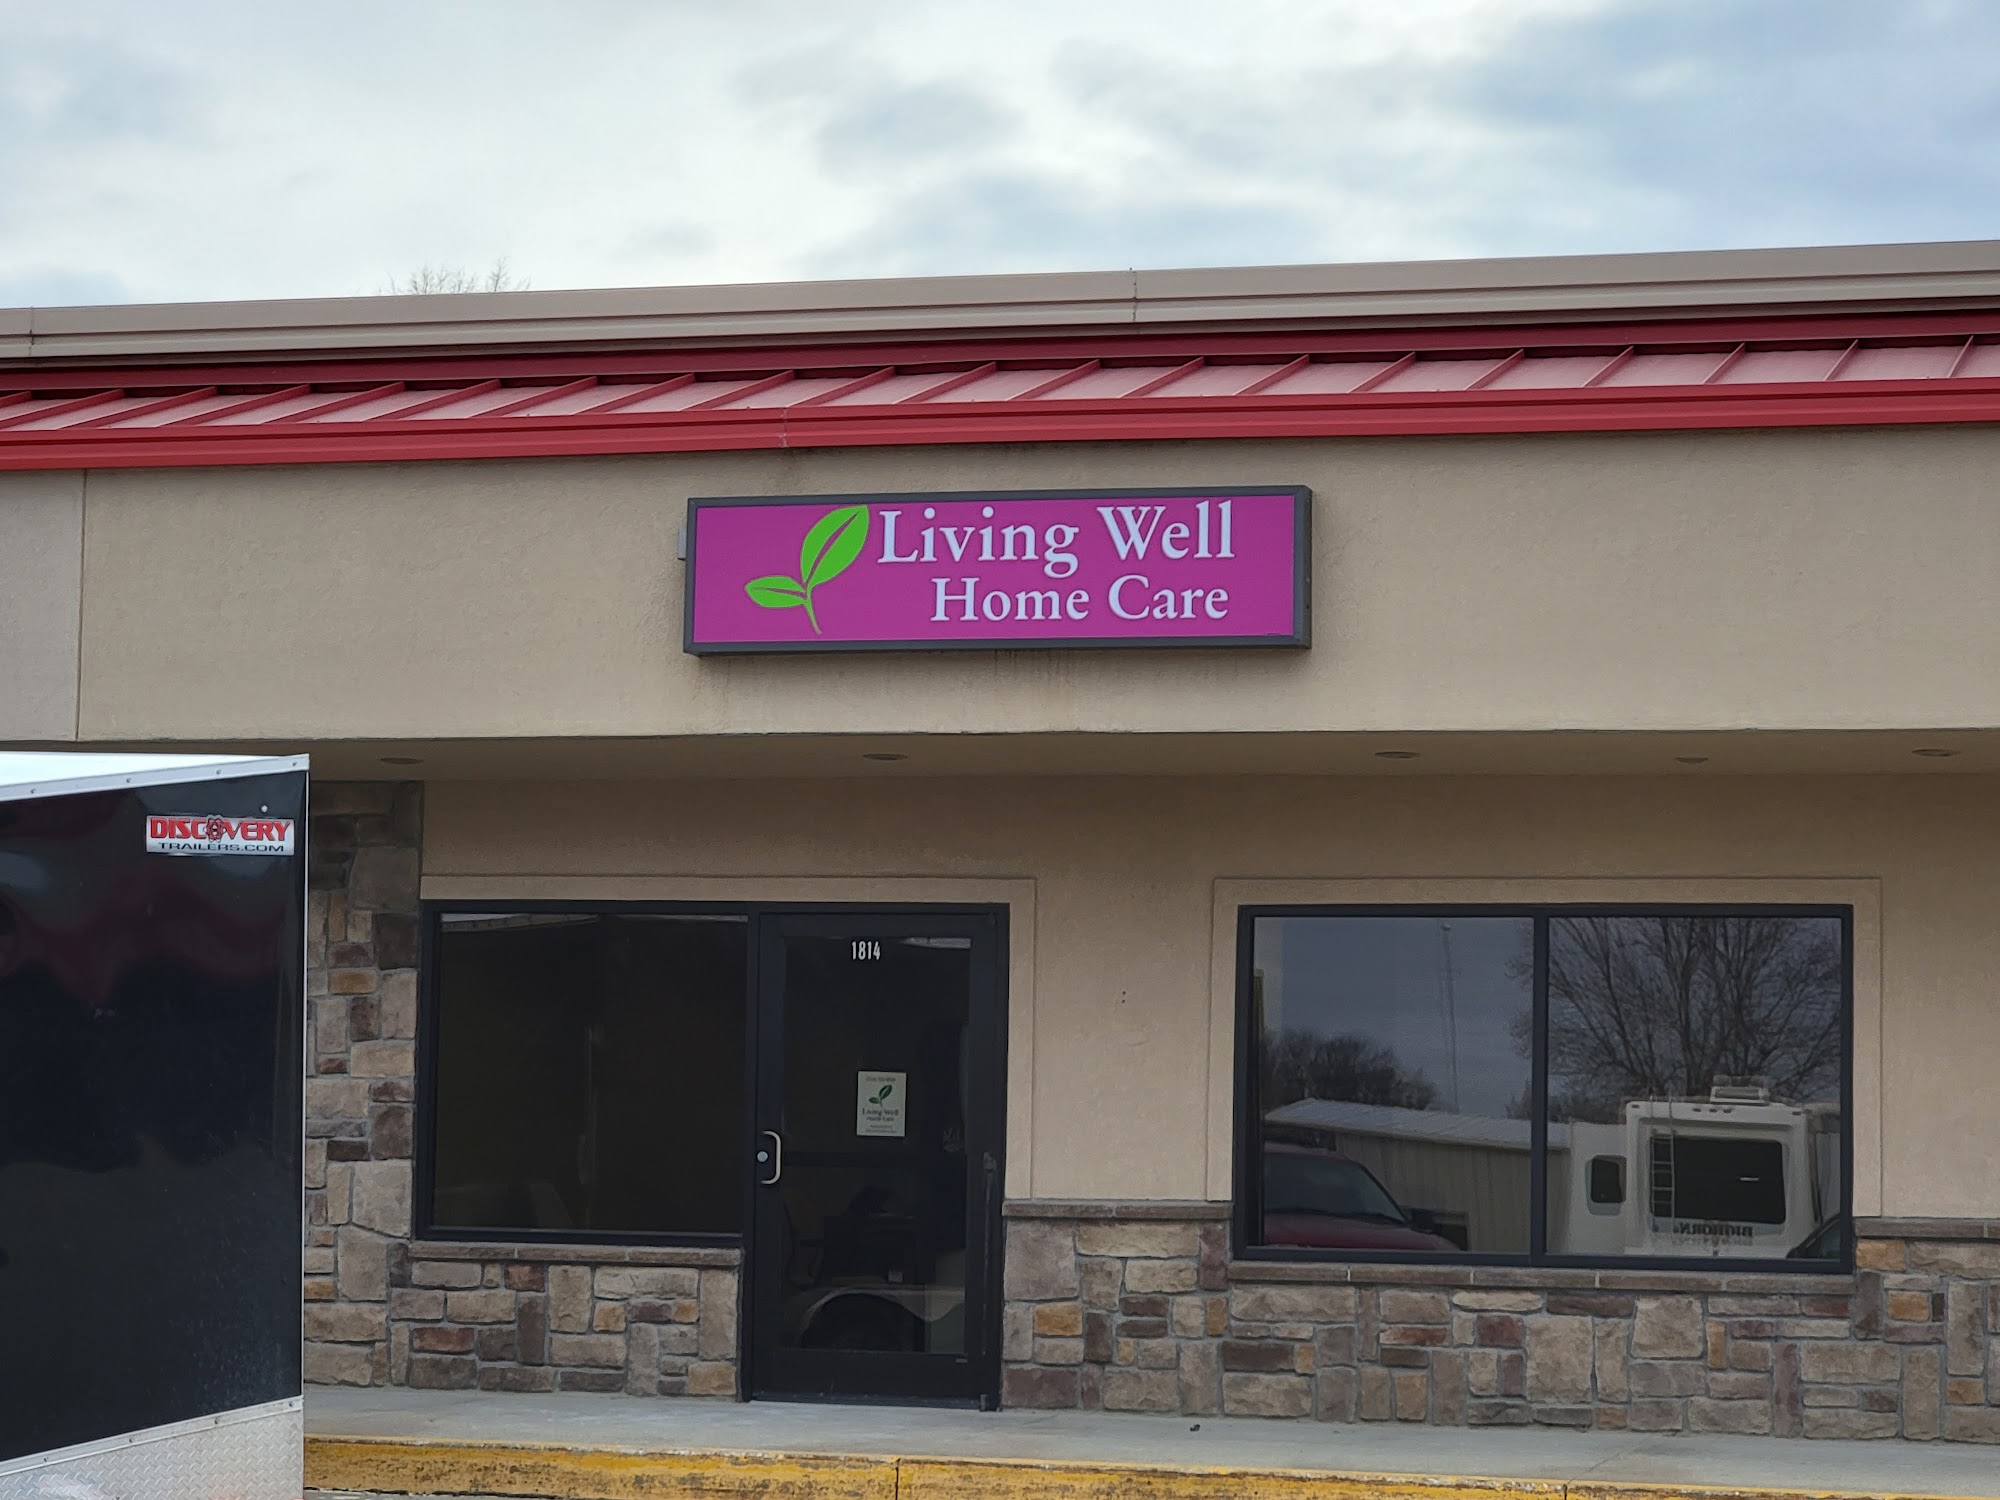 Living Well Home Care 1814 Chatburn Ave, Harlan Iowa 51537